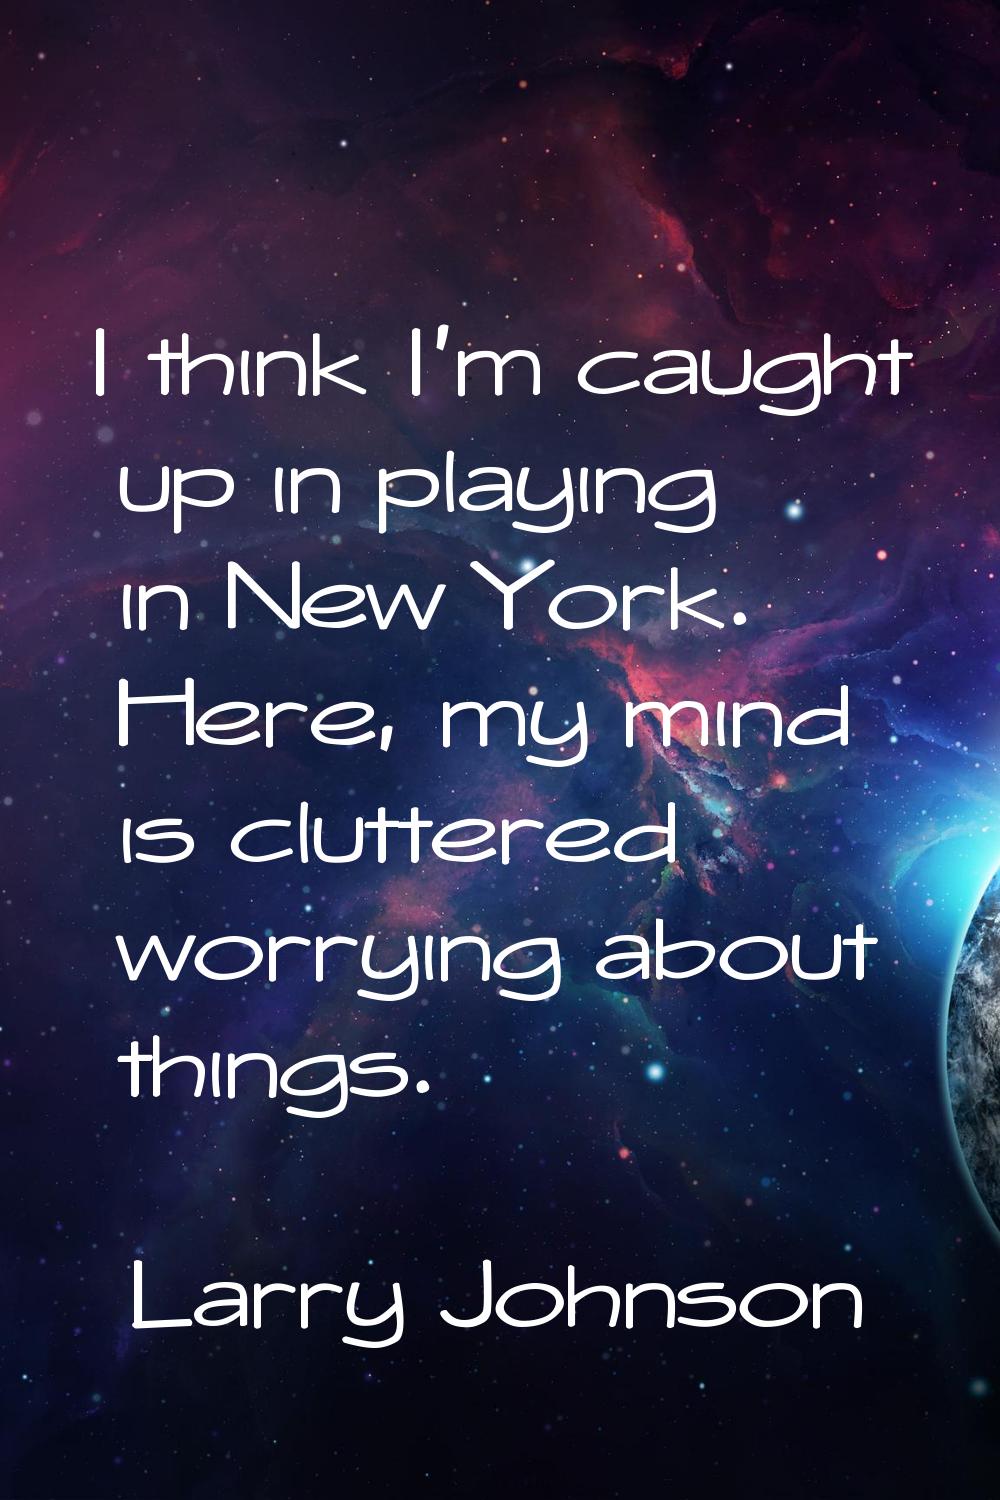 I think I'm caught up in playing in New York. Here, my mind is cluttered worrying about things.